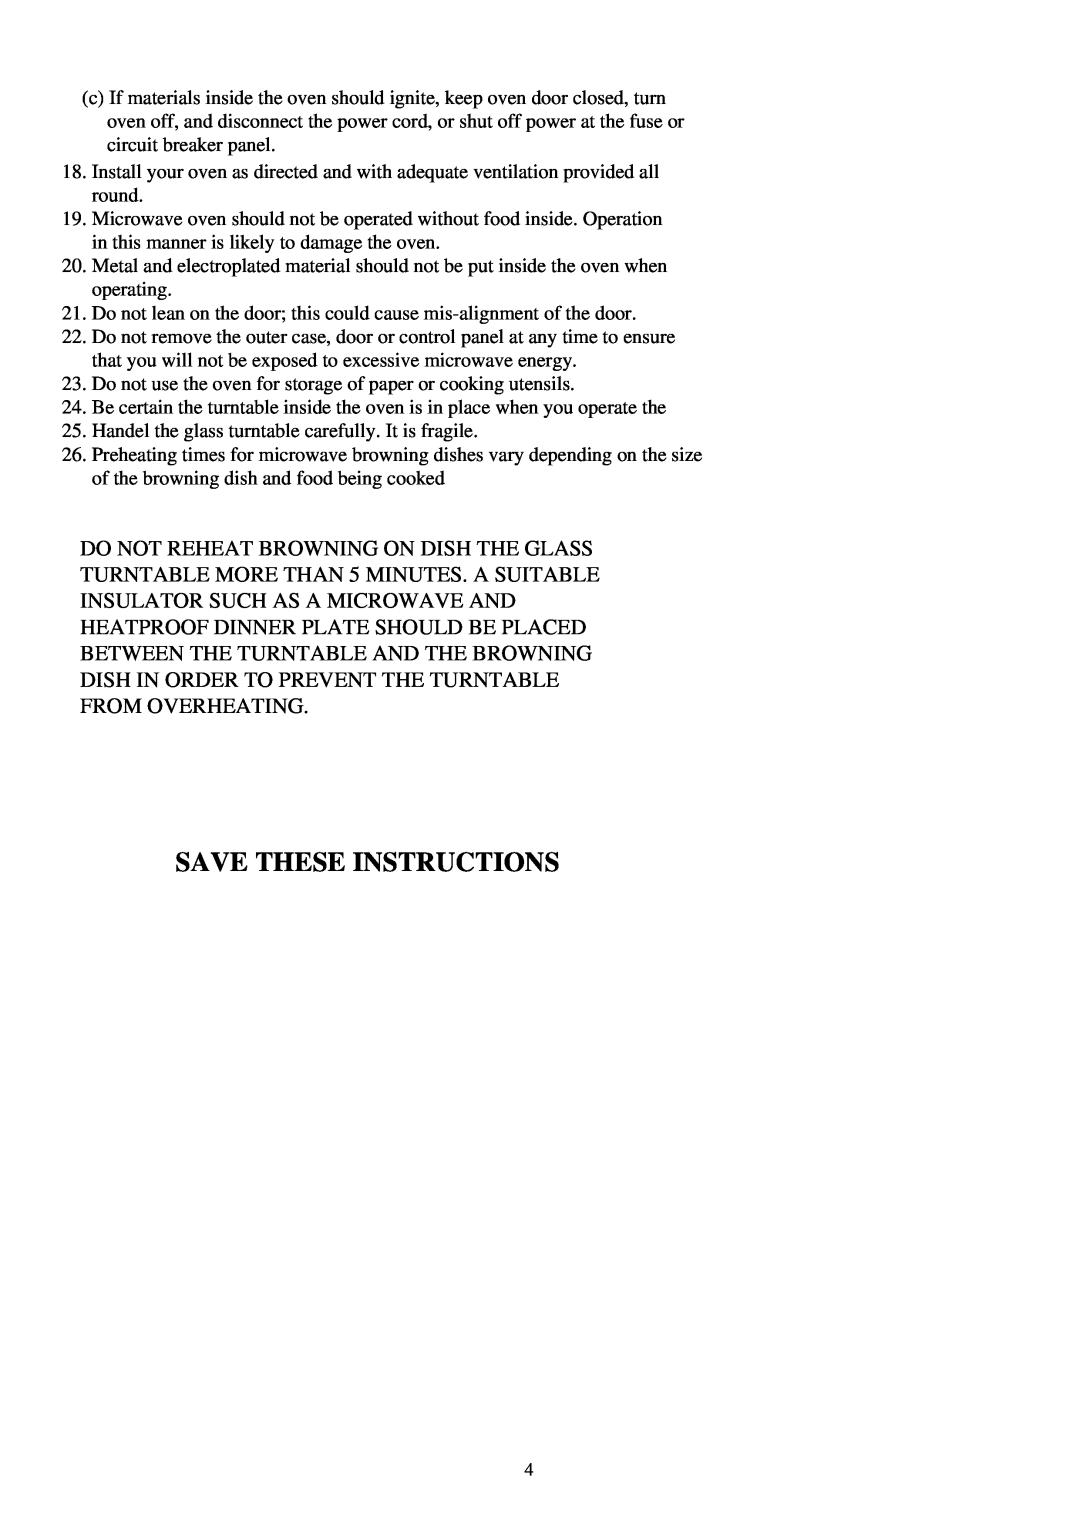 Palsonic PMO-750 manual Save These Instructions 